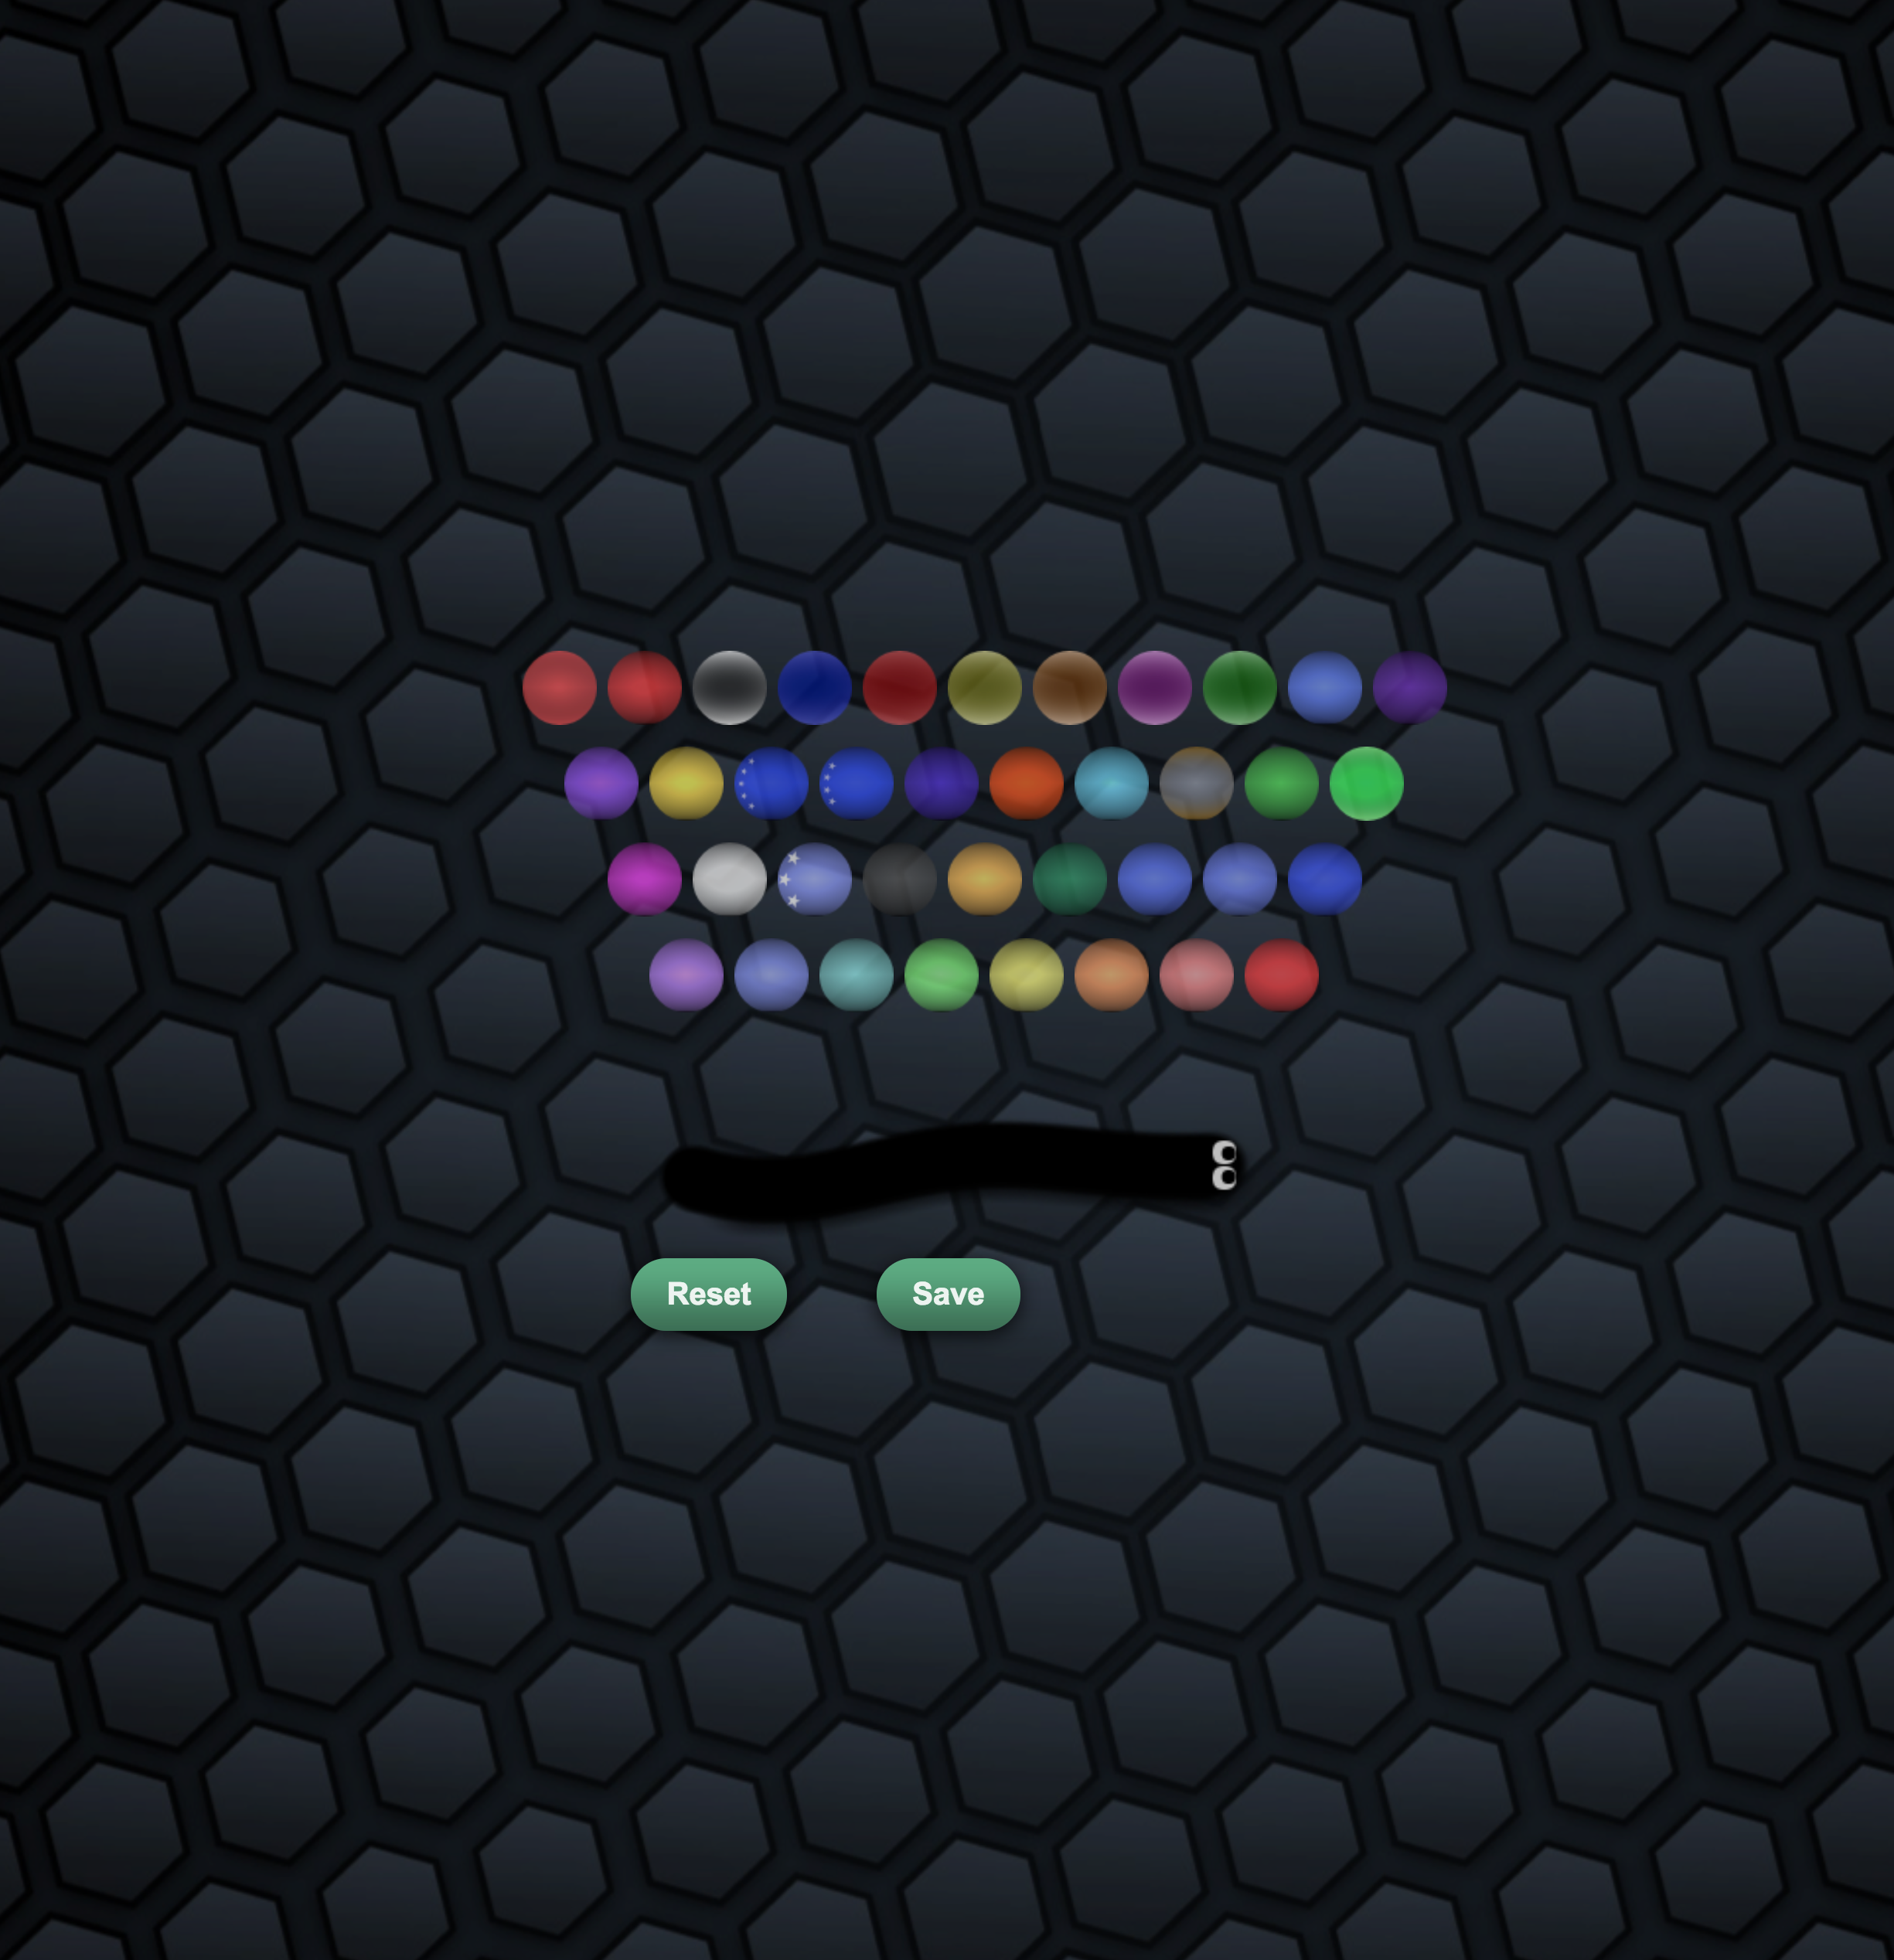 Build a Slither, slither.io Wiki